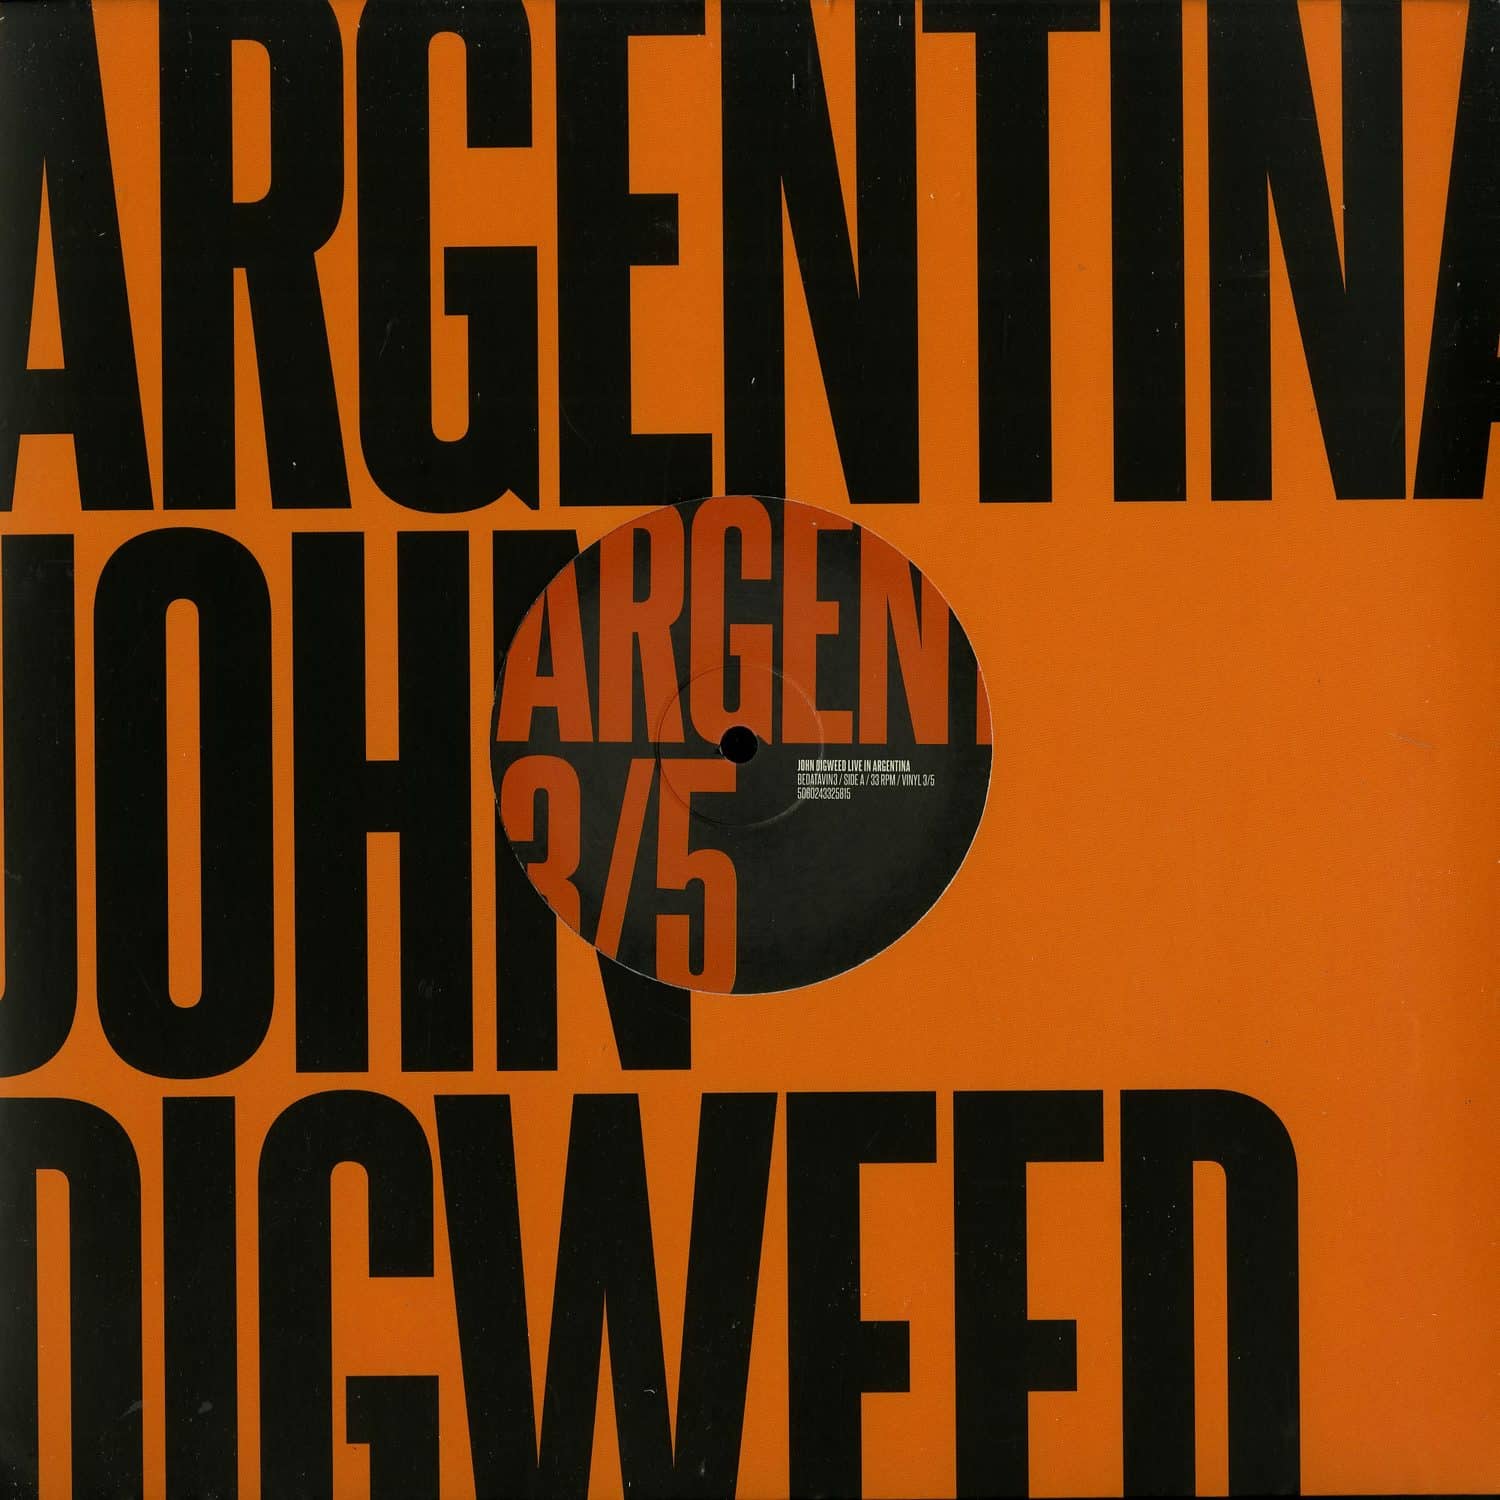 John Digweed - LIVE IN ARGENTINA - PART 3 OF 5